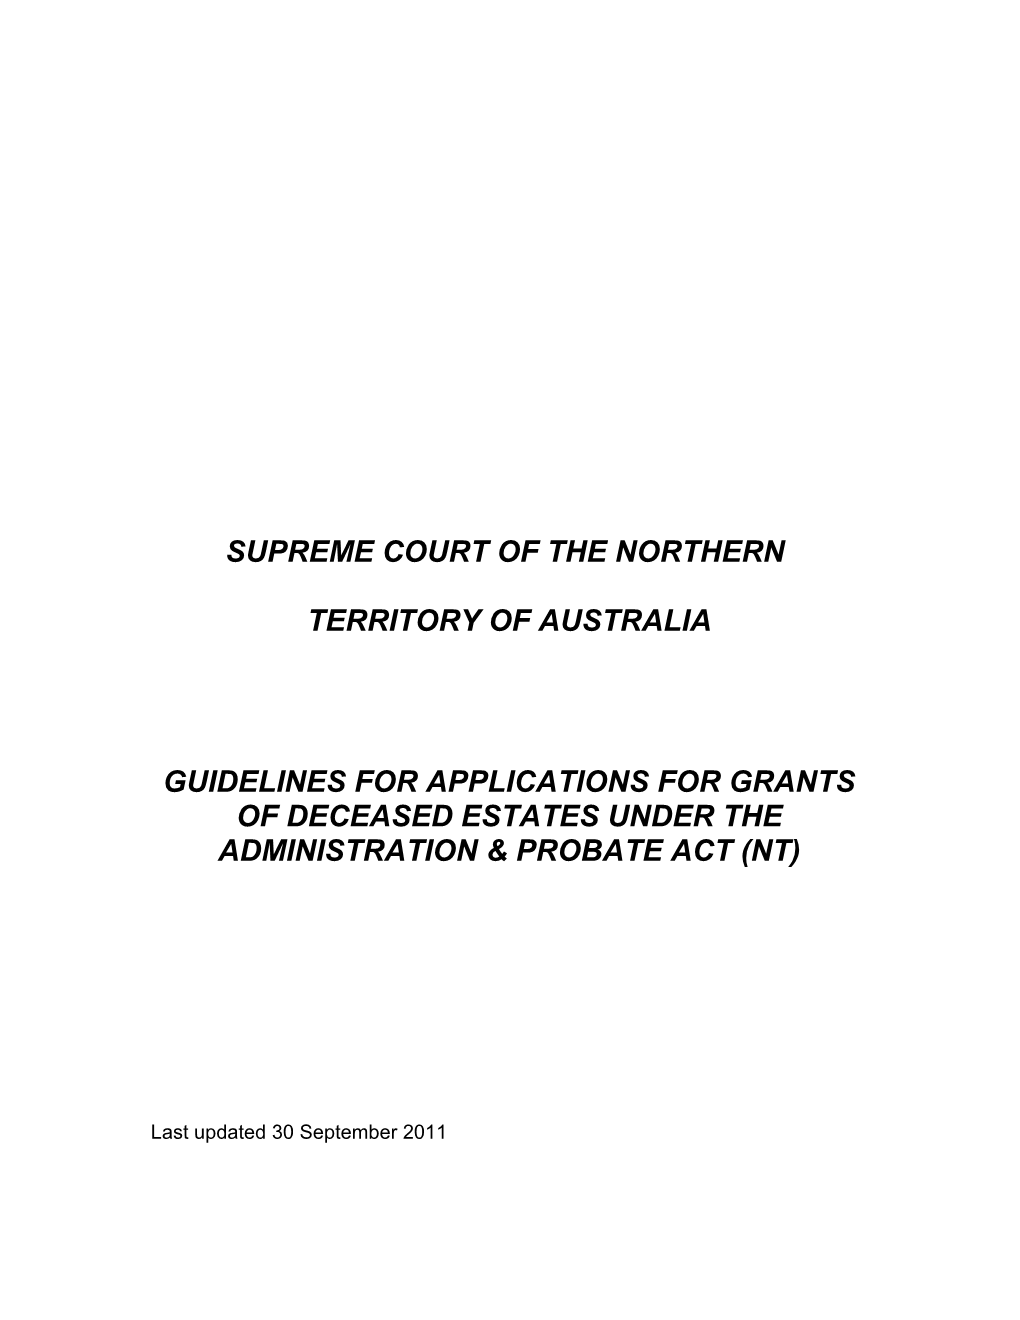 Supreme Court of the Northern